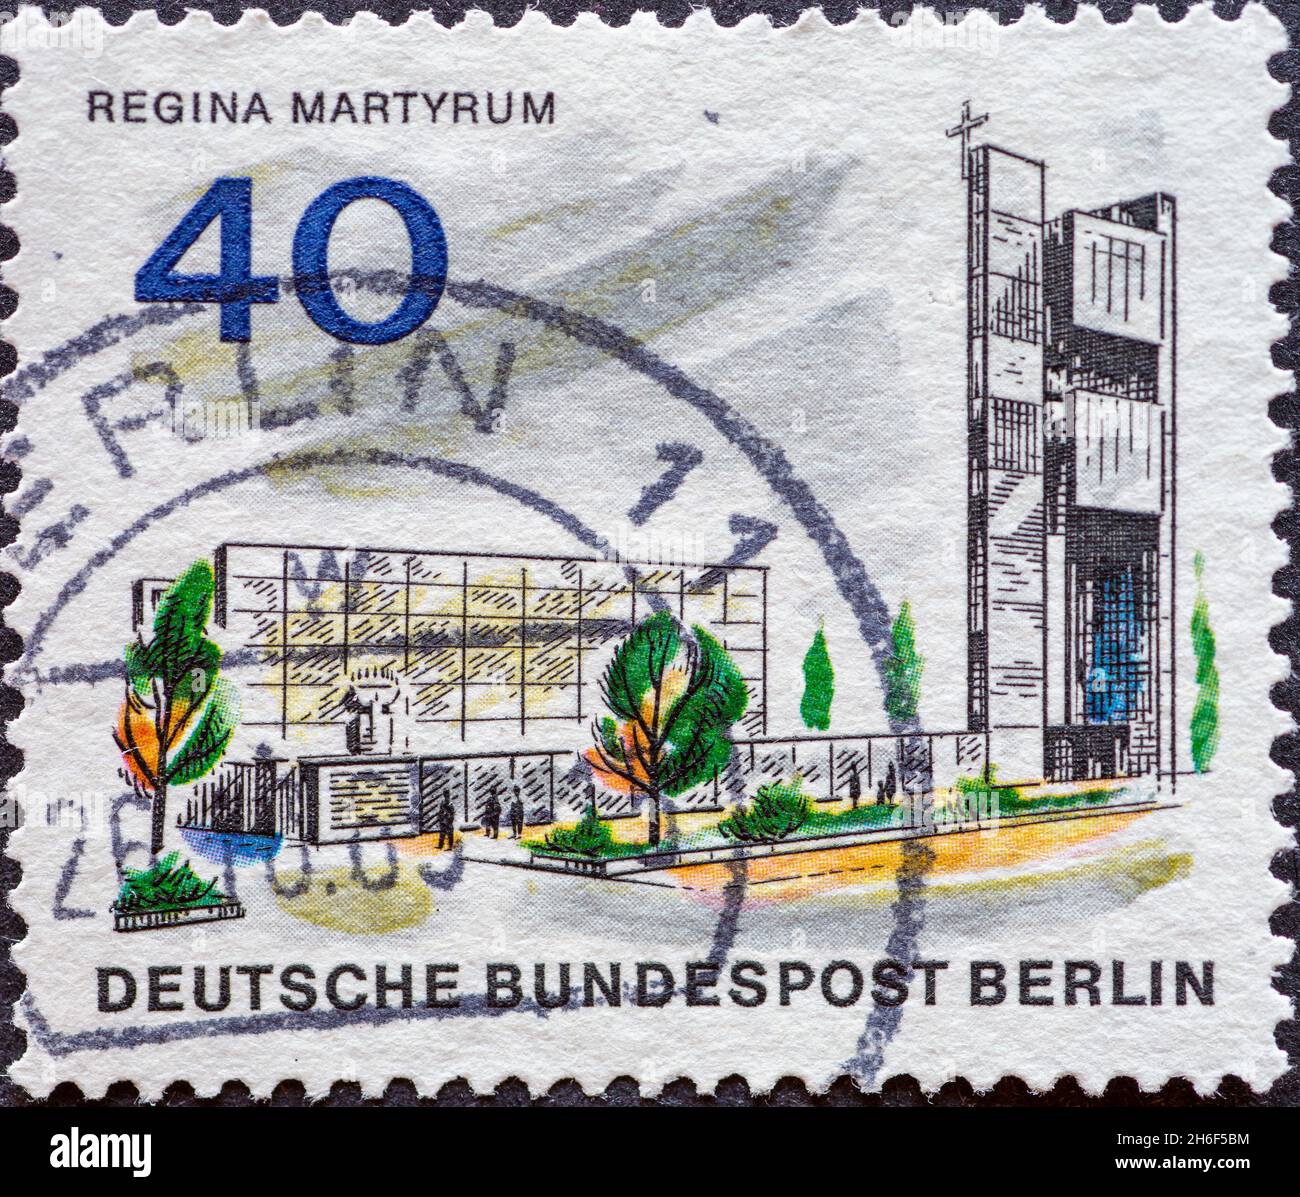 GERMANY, Berlin - CIRCA 1965: a postage stamp from Germany, Berlin showing a series the new Berlin: Regina martyrum Stock Photo